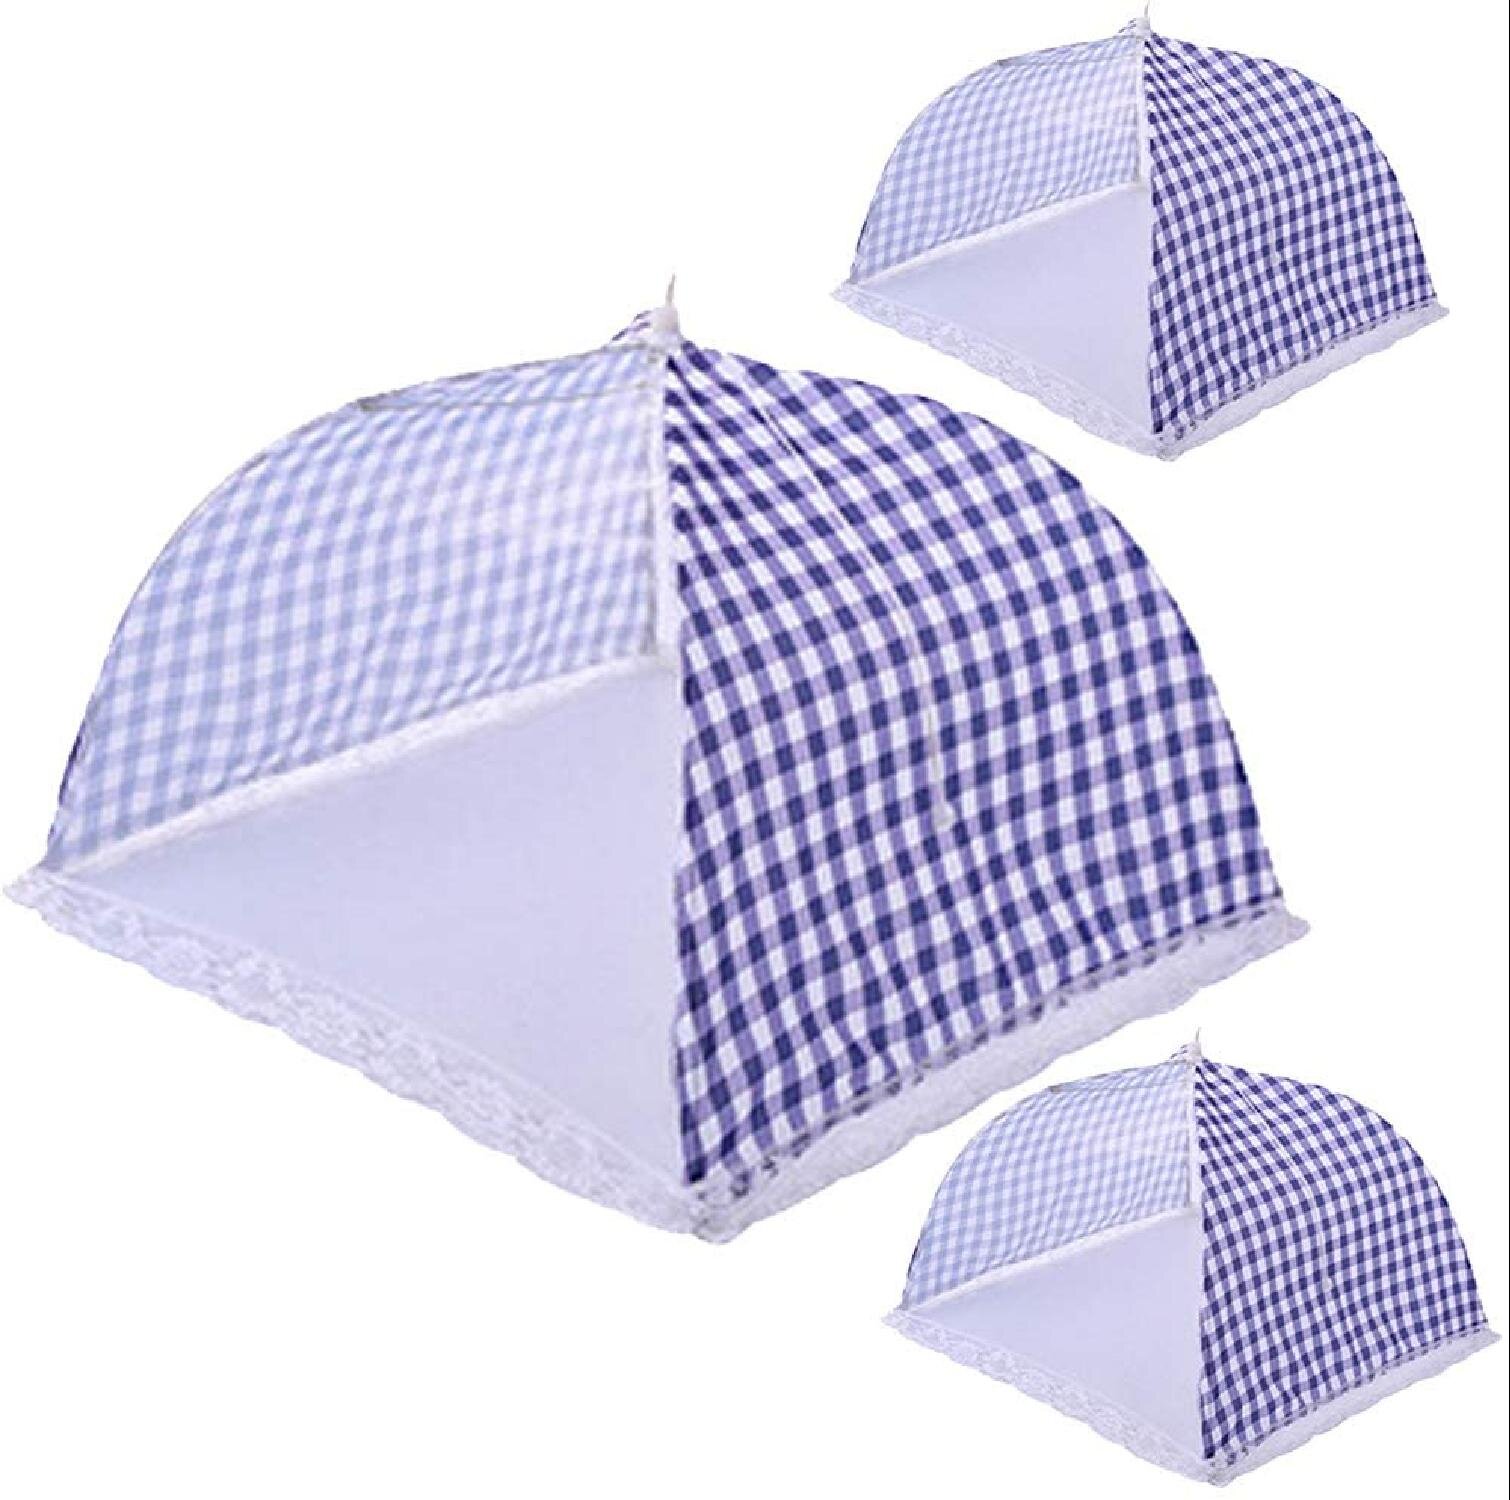 Kitchen Food Dish Cover Folded Umbrella Tent Anti Fly Mosquito Table Mesh Net 